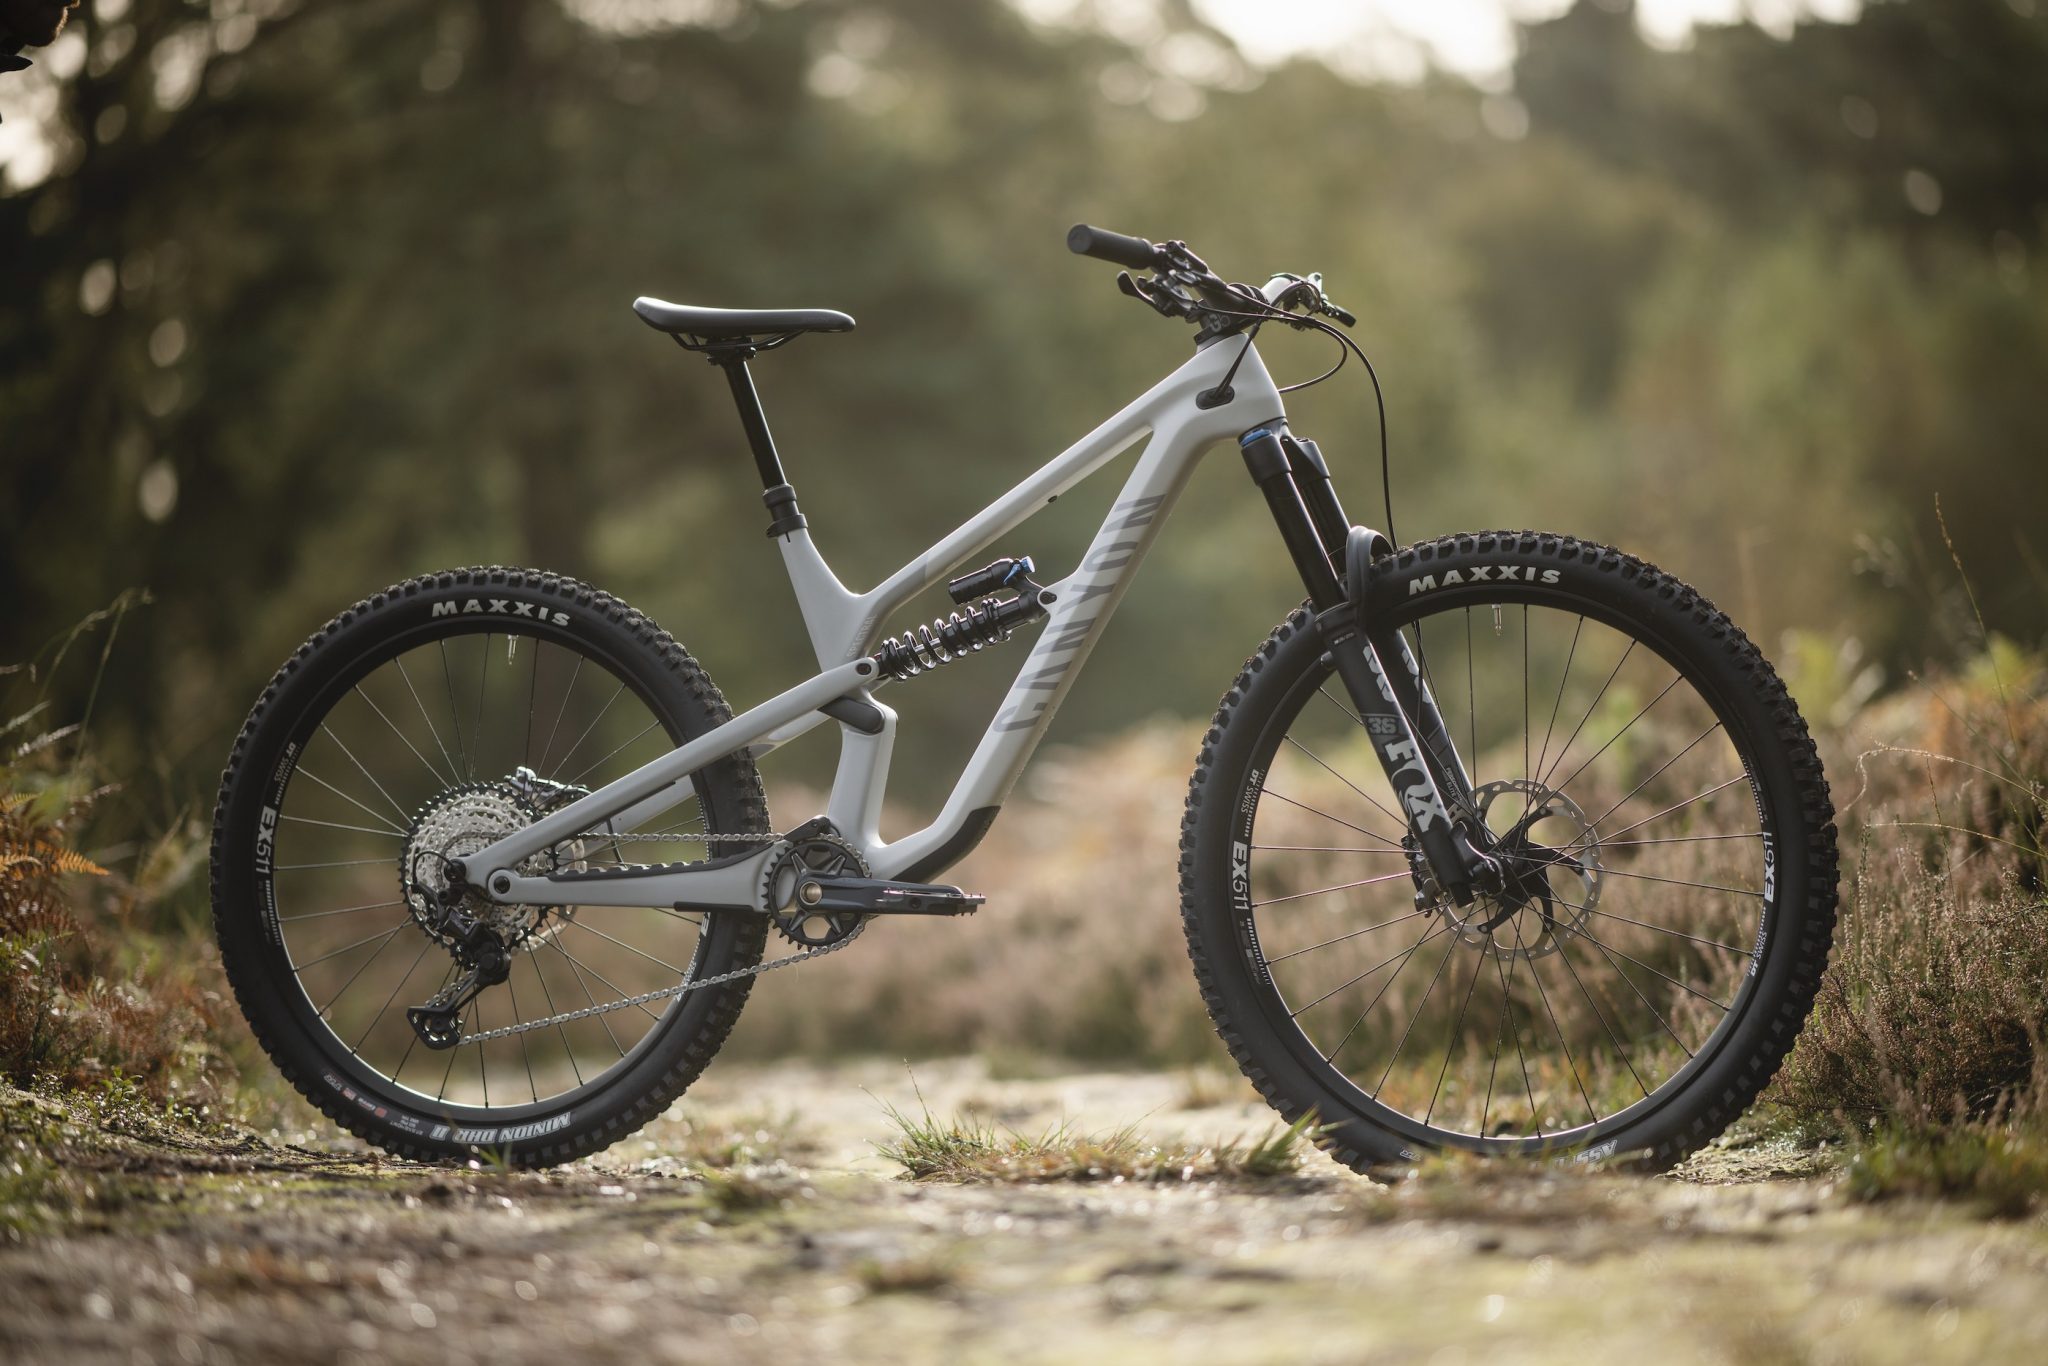 Canyon Bikes Releases Aluminum Spectral Mountain Bike And More